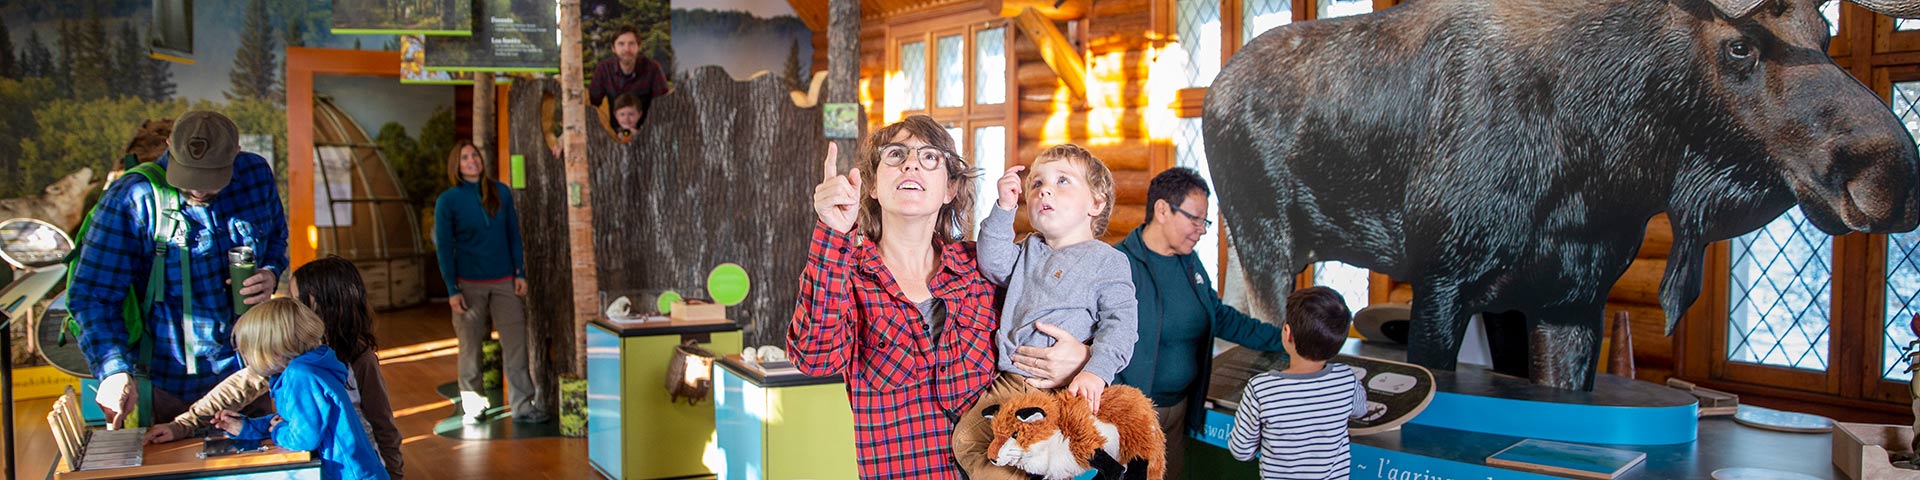 Visitors explore the Parks Canada Nature Centre in Waskesiu in Prince Albert National Park.